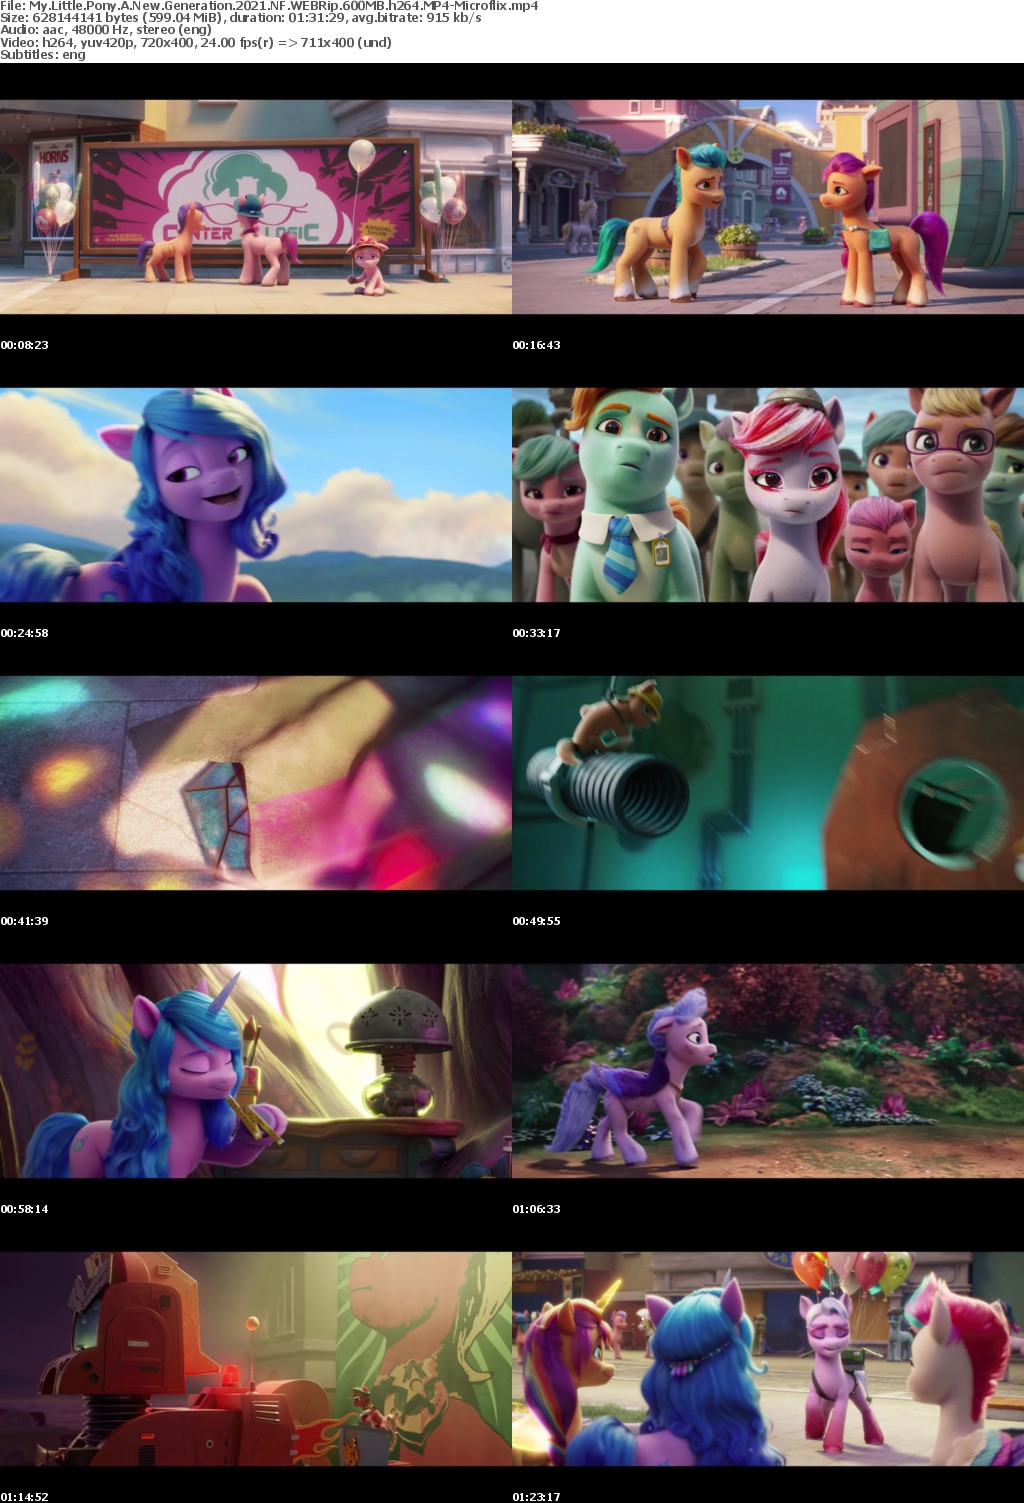 My Little Pony A New Generation 2021 NF WEBRip 600MB h264 MP4-Microflix